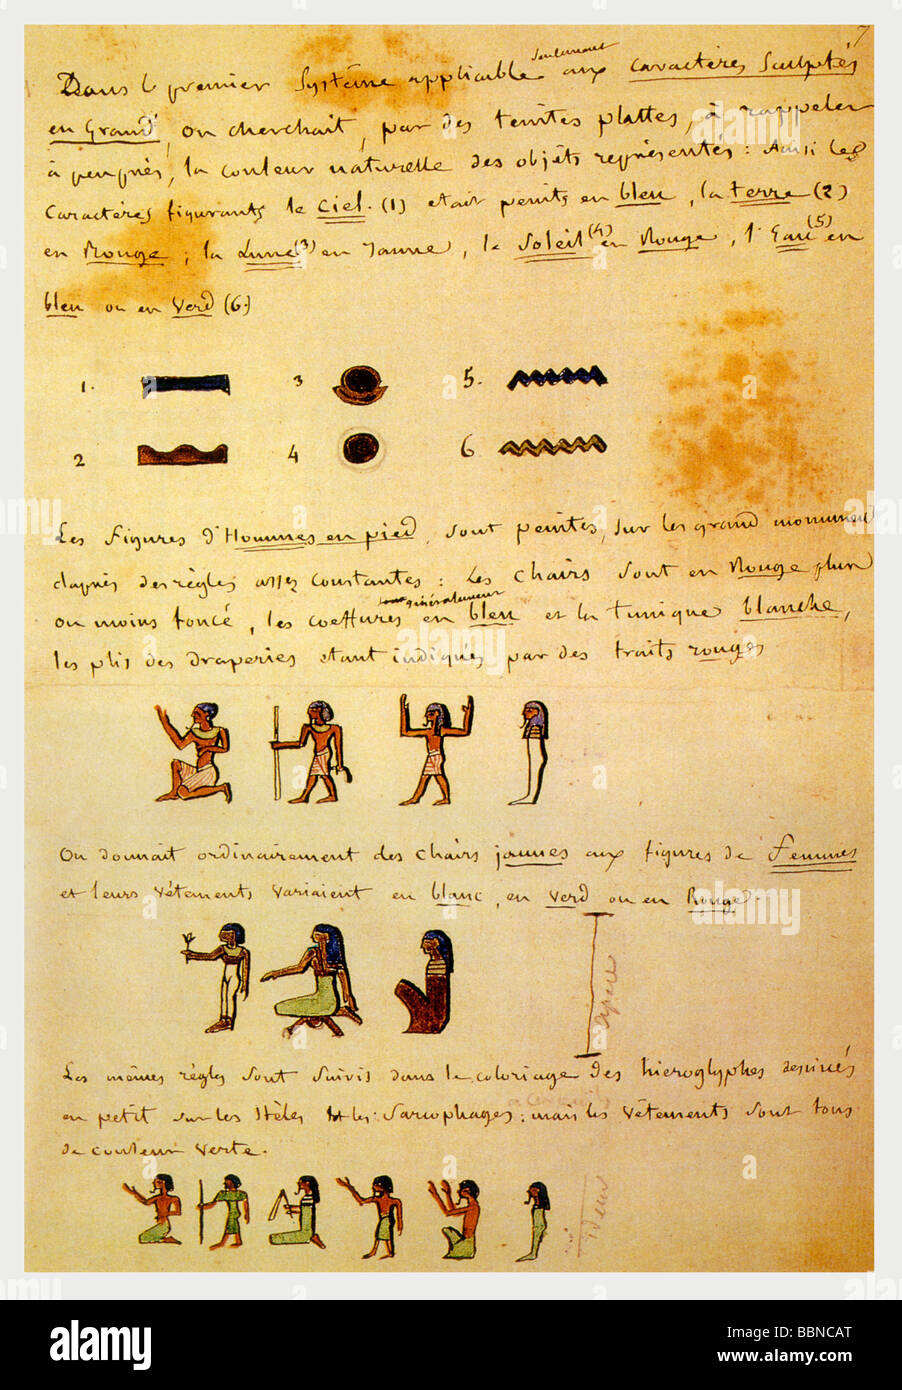 Champollion, Jean Francois, 23.12.1790 - 4.3.1832, French scholar, scientist, founder of Egyptology, page from 'Dictionnaire egyptienne', between 1836 - 1841, Biblioteque Nationale Paris, Stock Photo